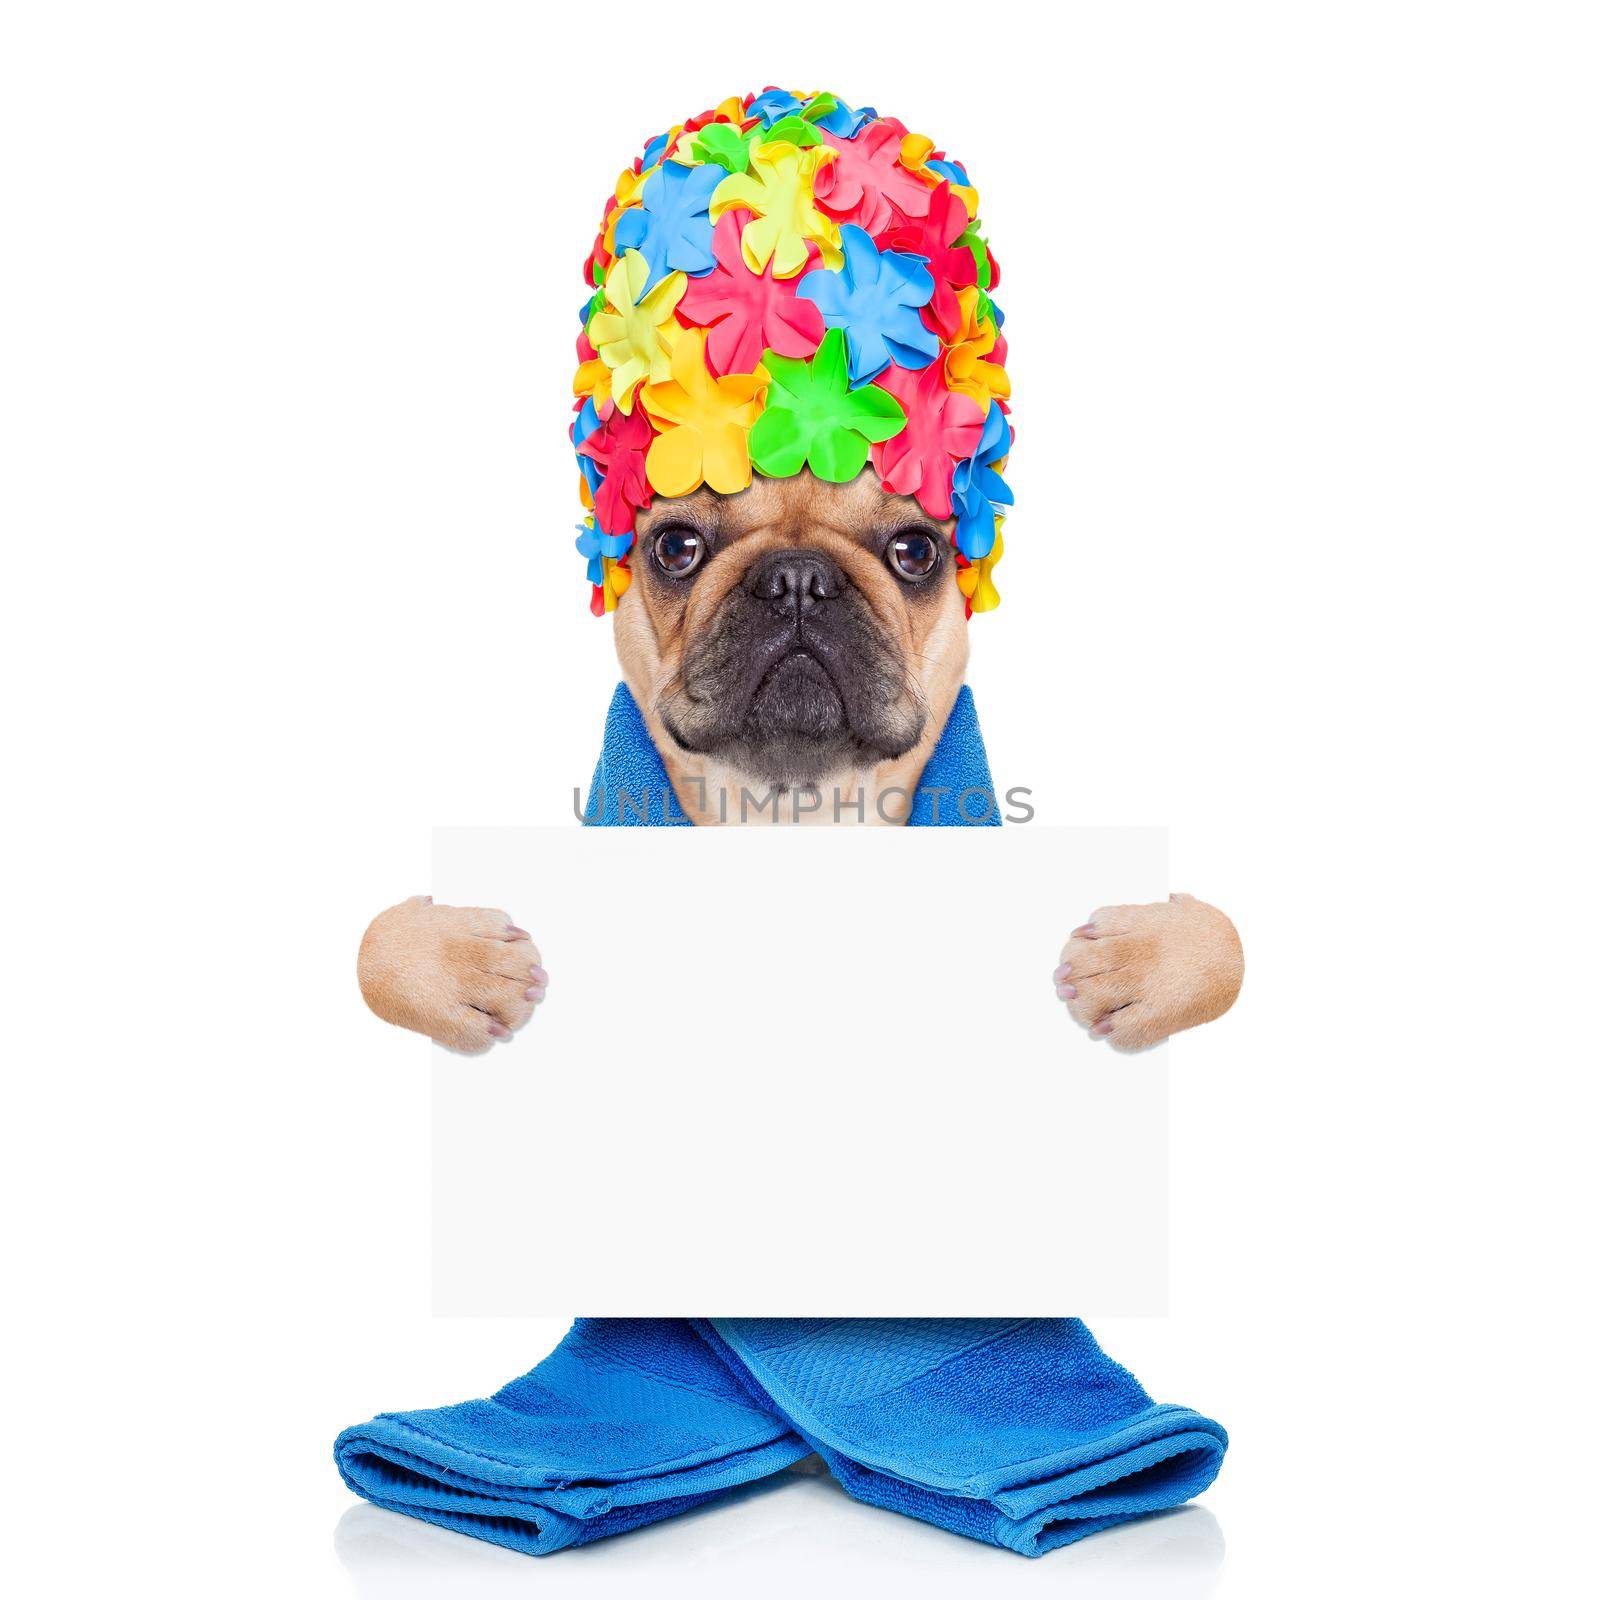 french bulldog dog ready to have a bath or a shower wearing a bathing cap and towel, holding a white placard or banner isolated on white background